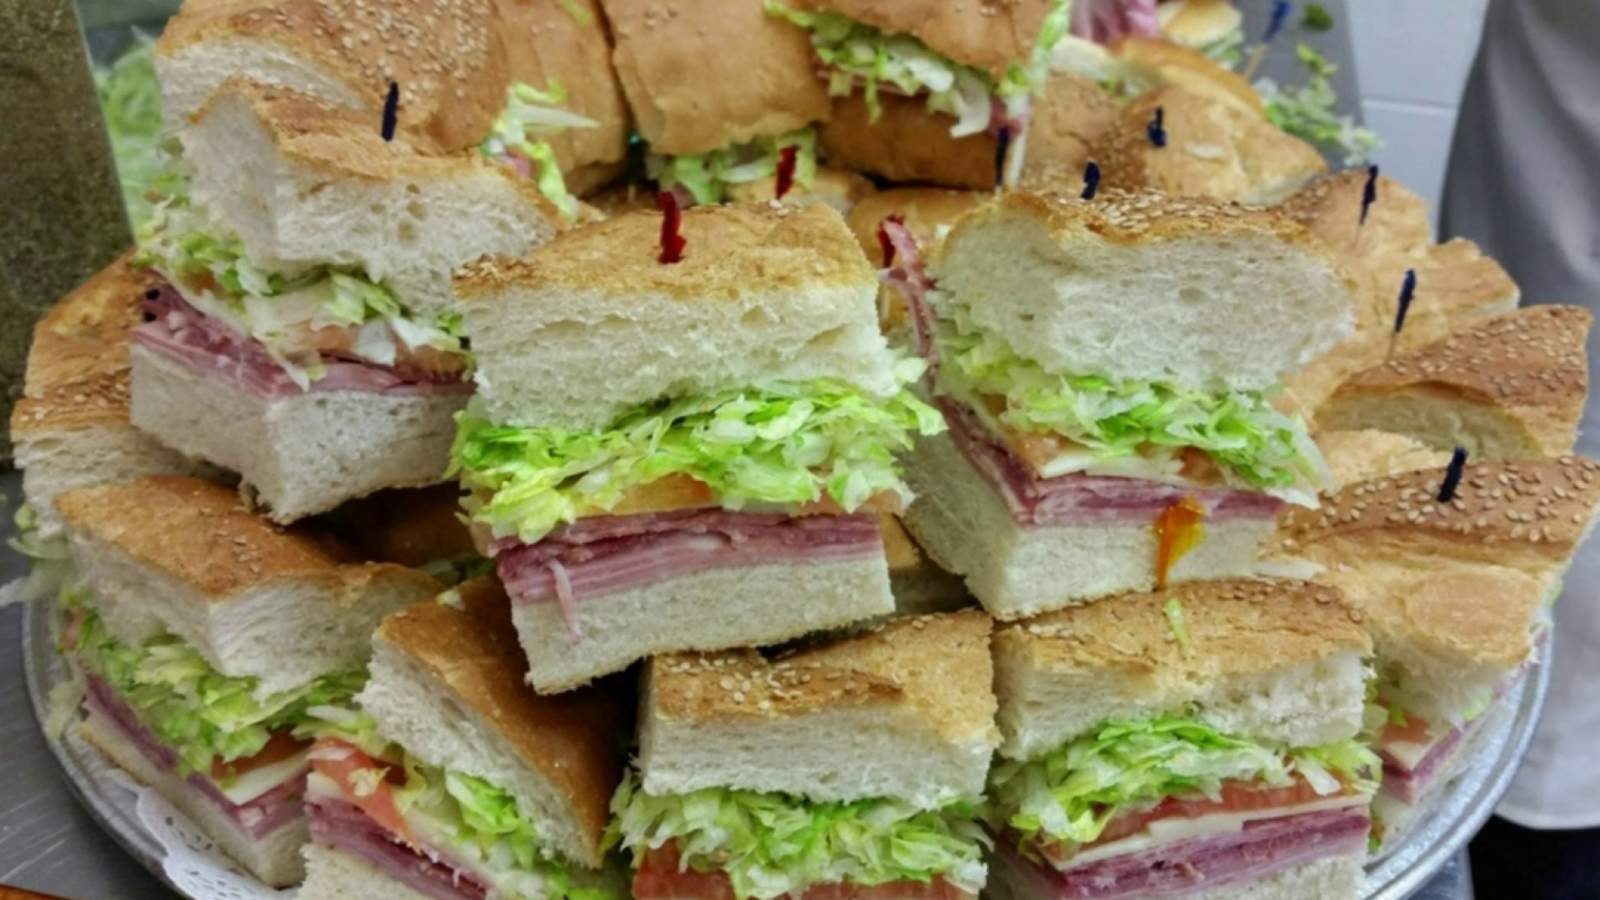 Find the Italian sandwich or Italian meal you’re looking for at these sister stores in Sterling Heights